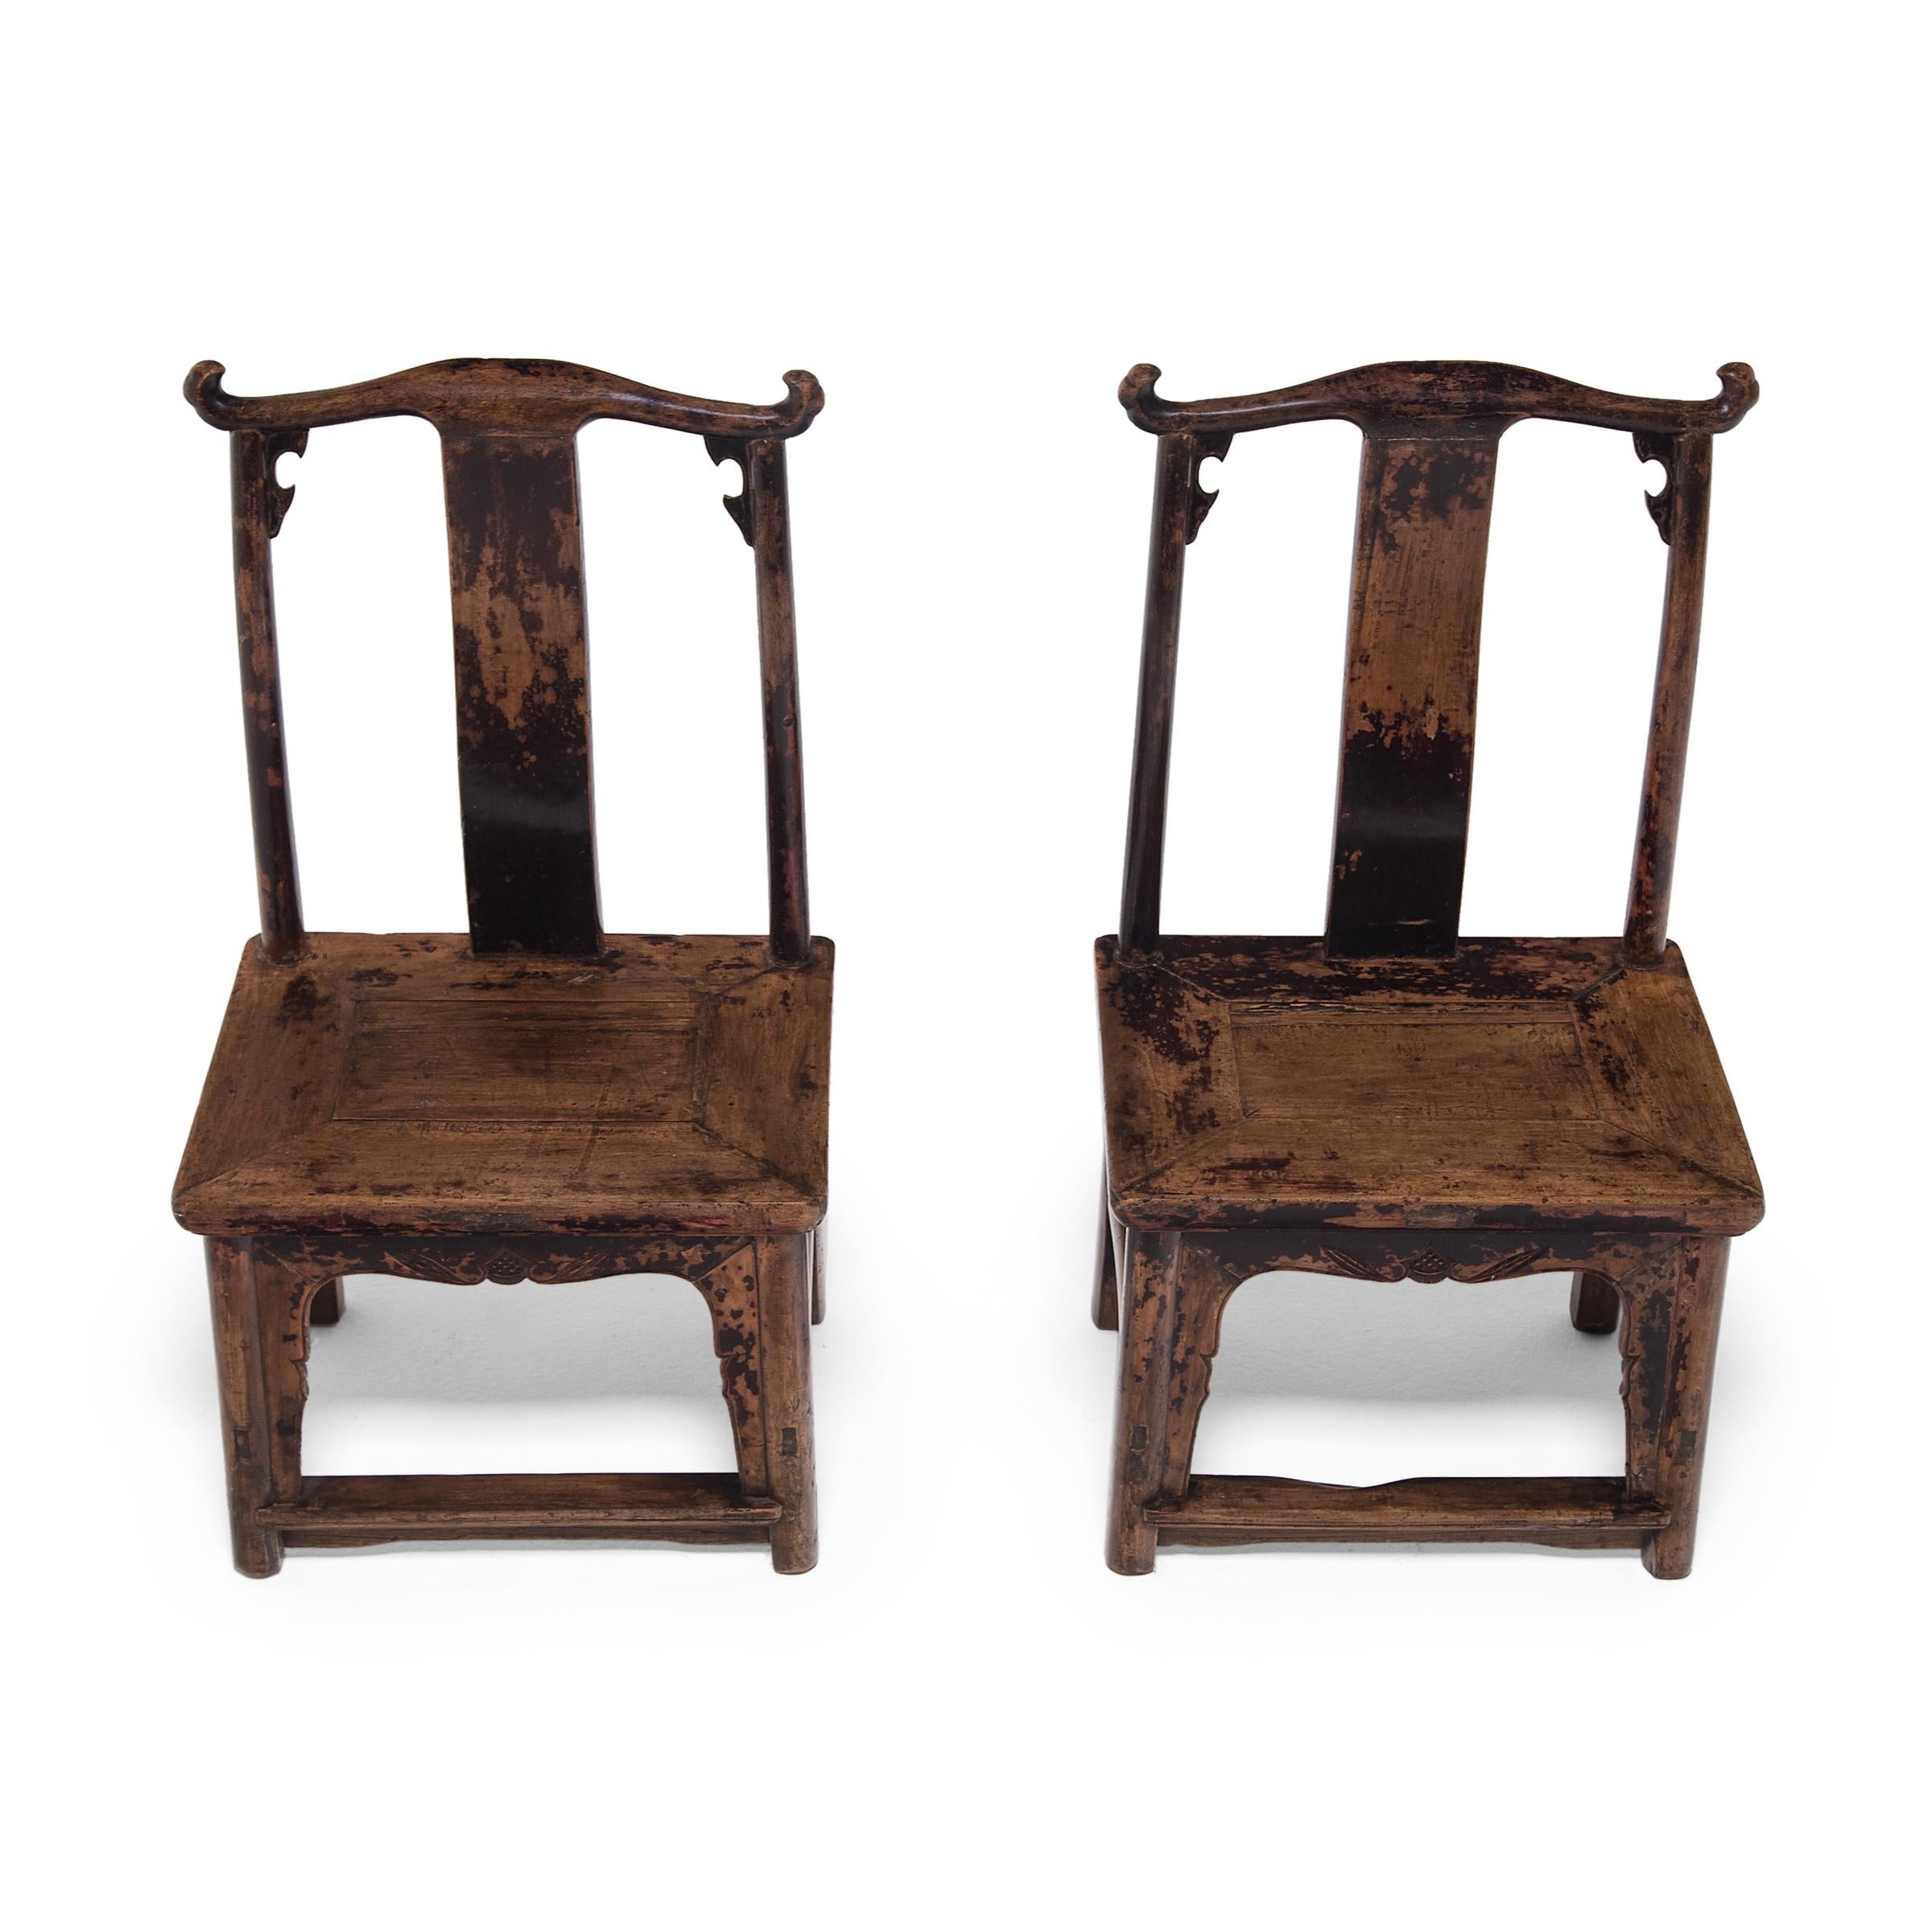 Pair of Chinese Yokeback Children's Chairs, c. 1850 In Good Condition For Sale In Chicago, IL